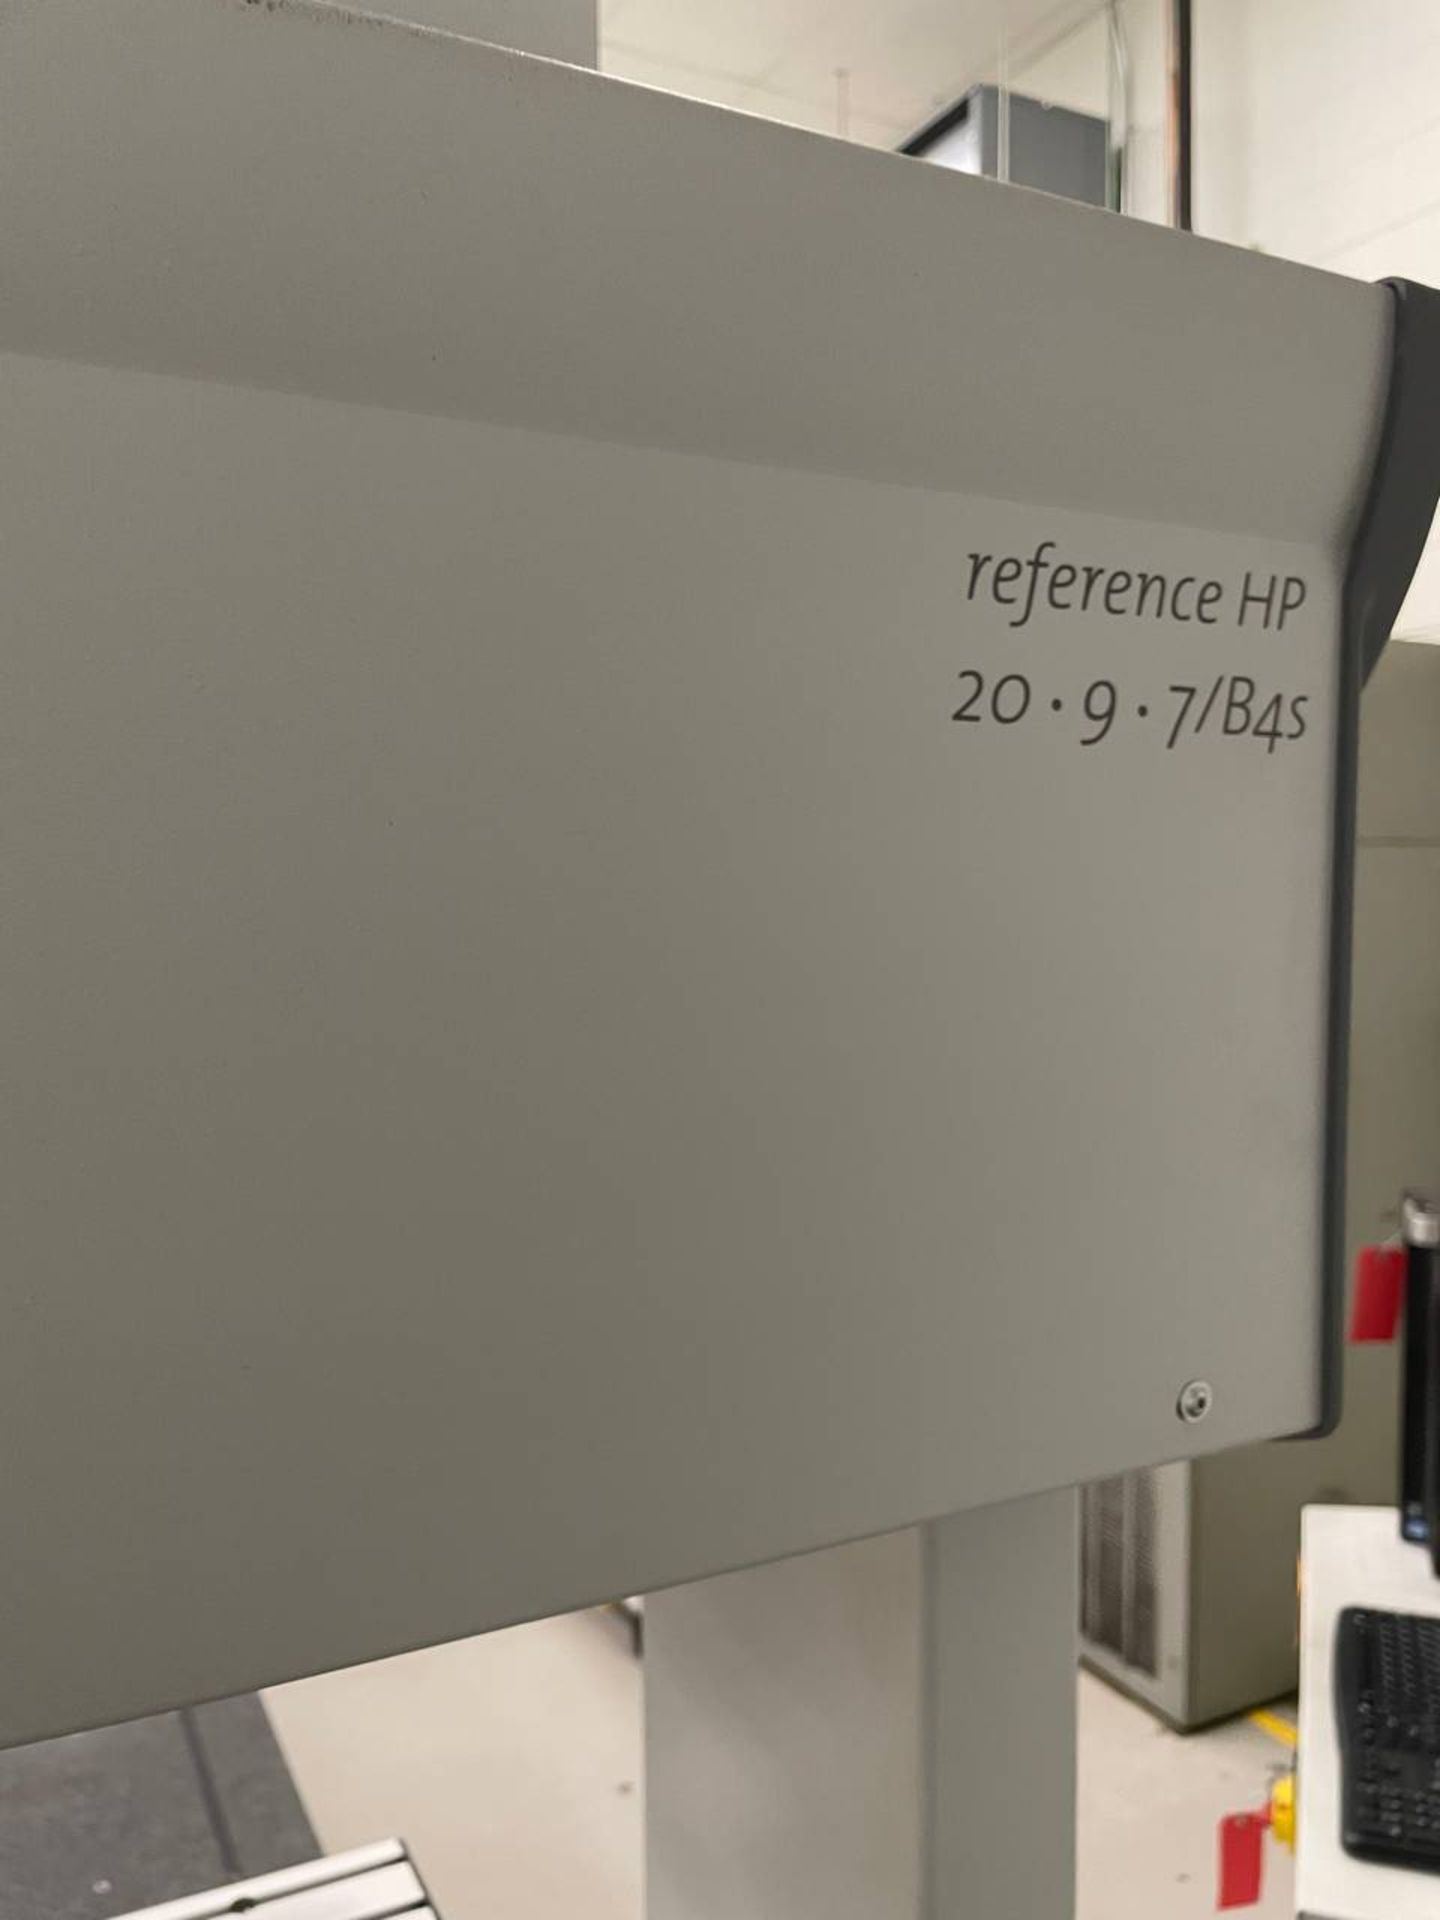 2013 Leitz/Hexagon Reference HP Coordinate Measuring Machine - Image 5 of 5